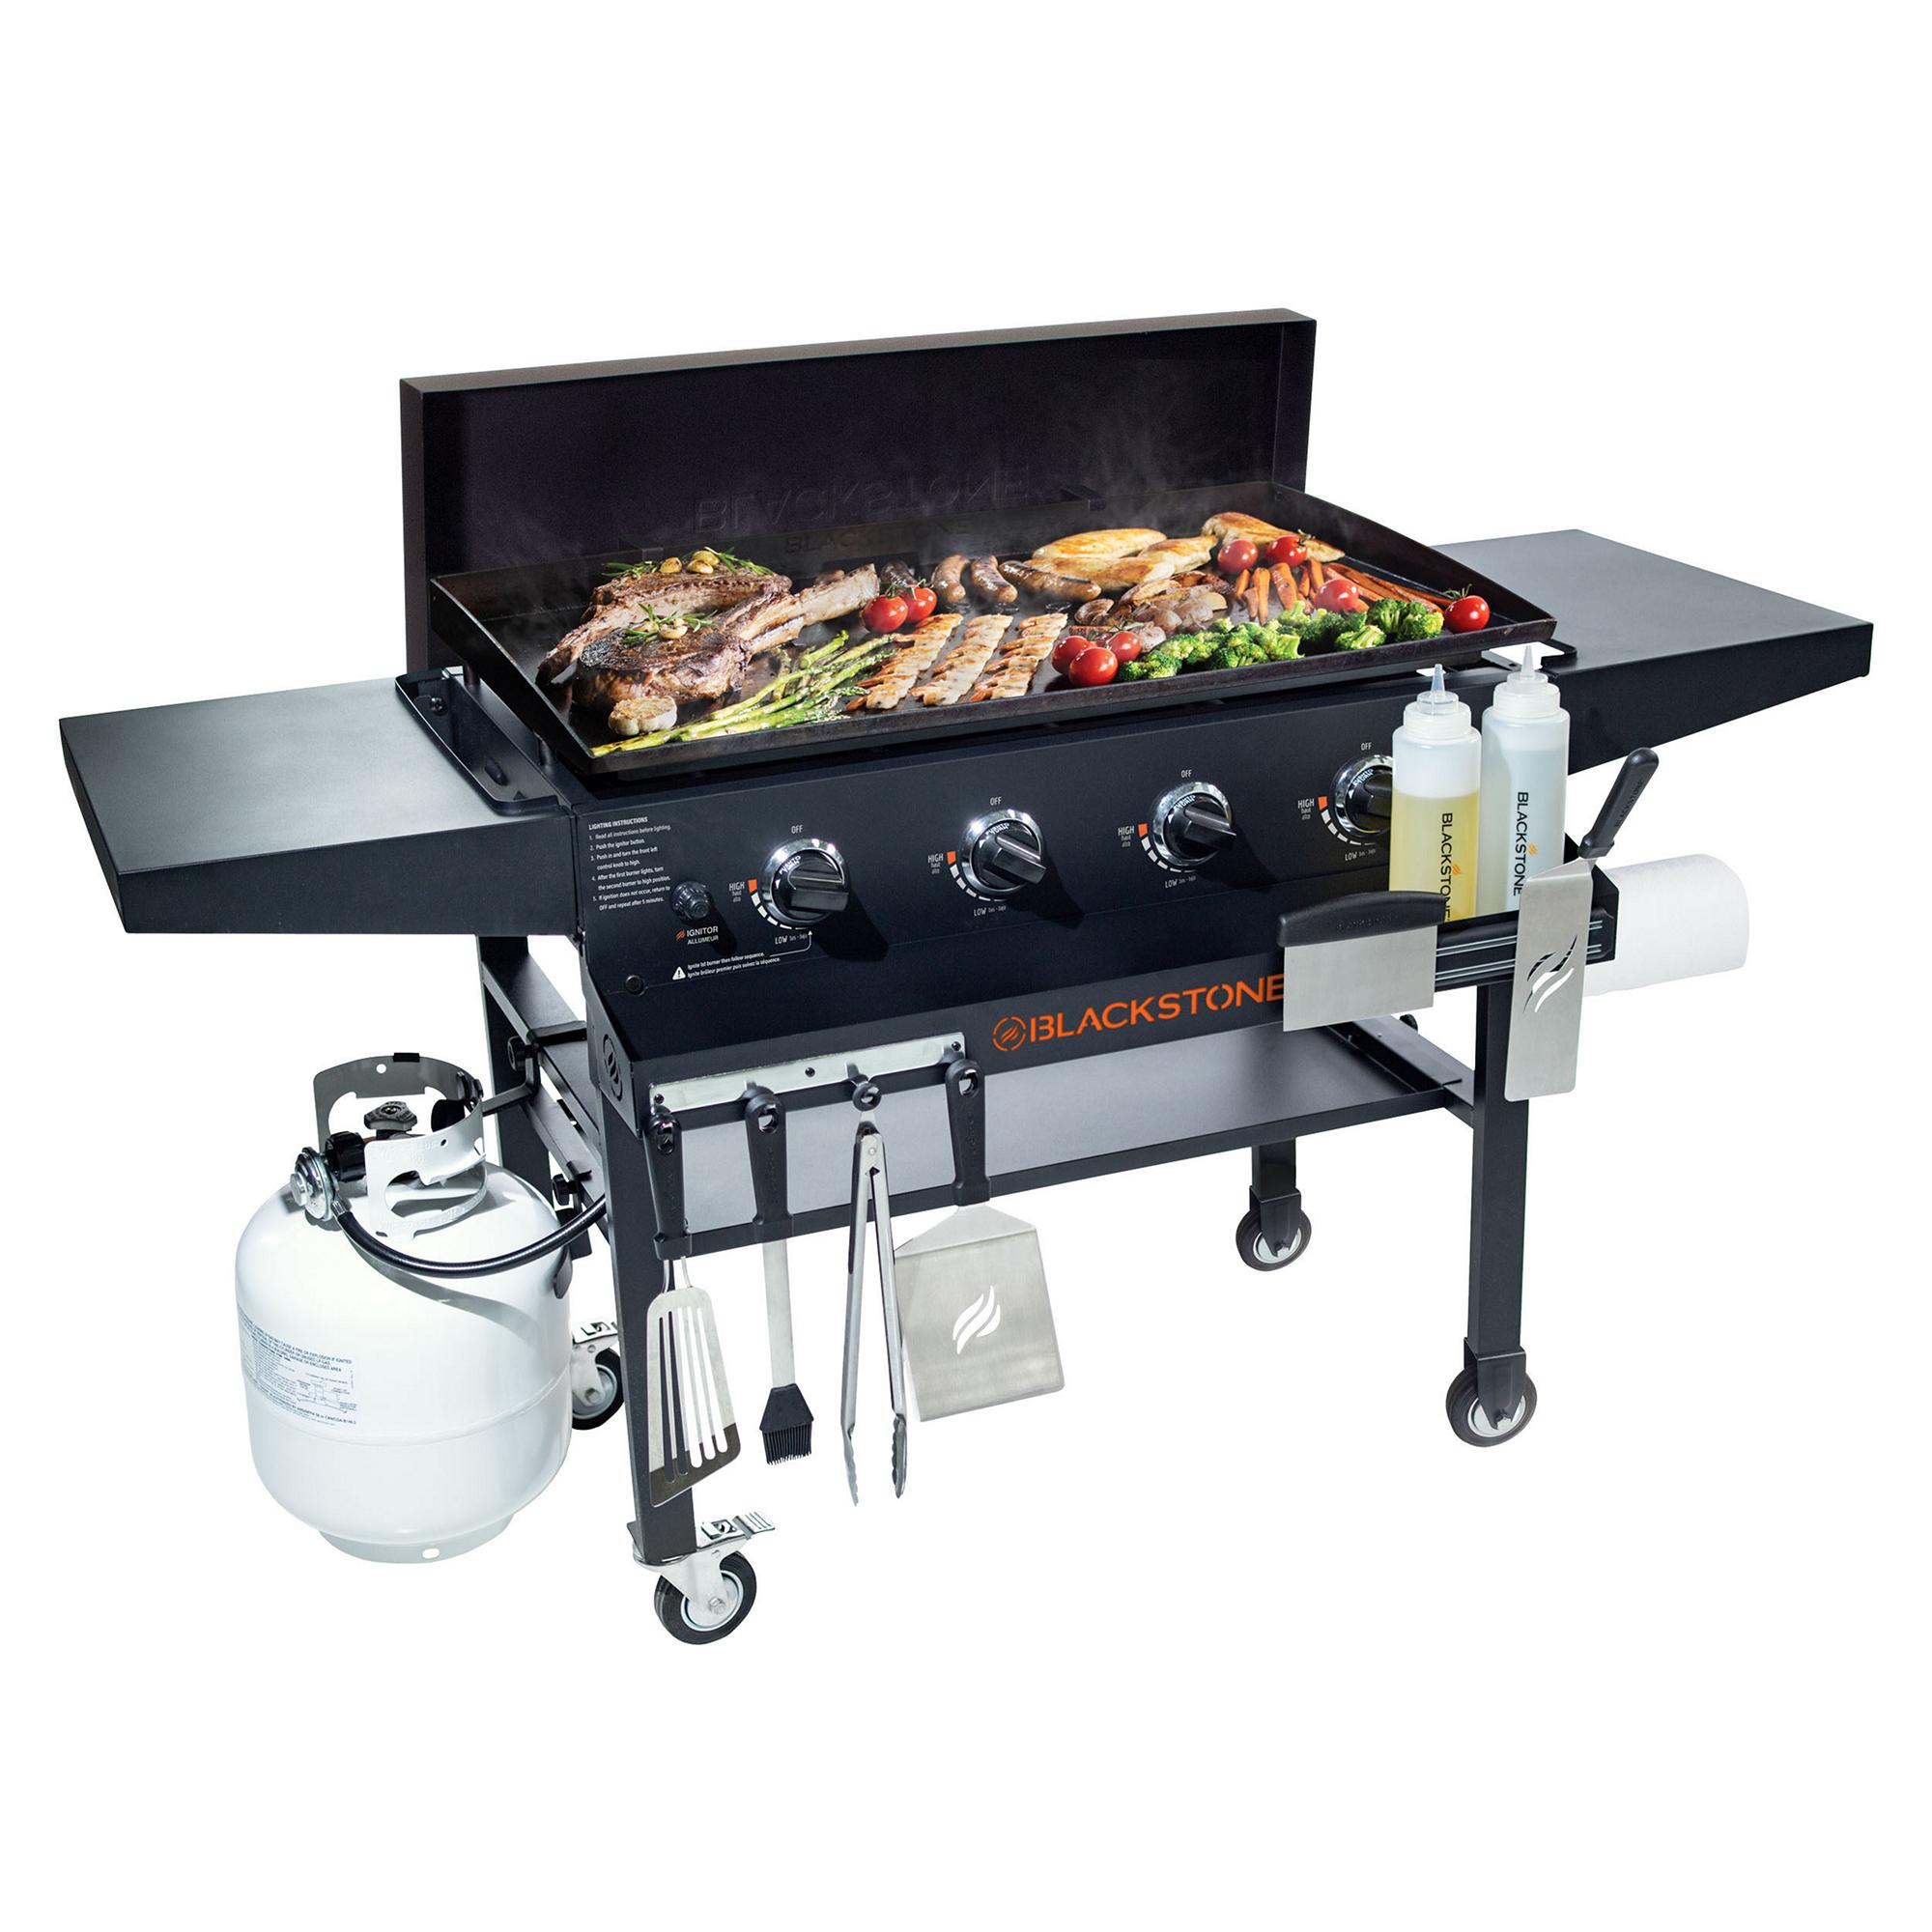 Save 25% 36" Blackstone Gas Griddle with Hard Cover and Front Shelf $299.98